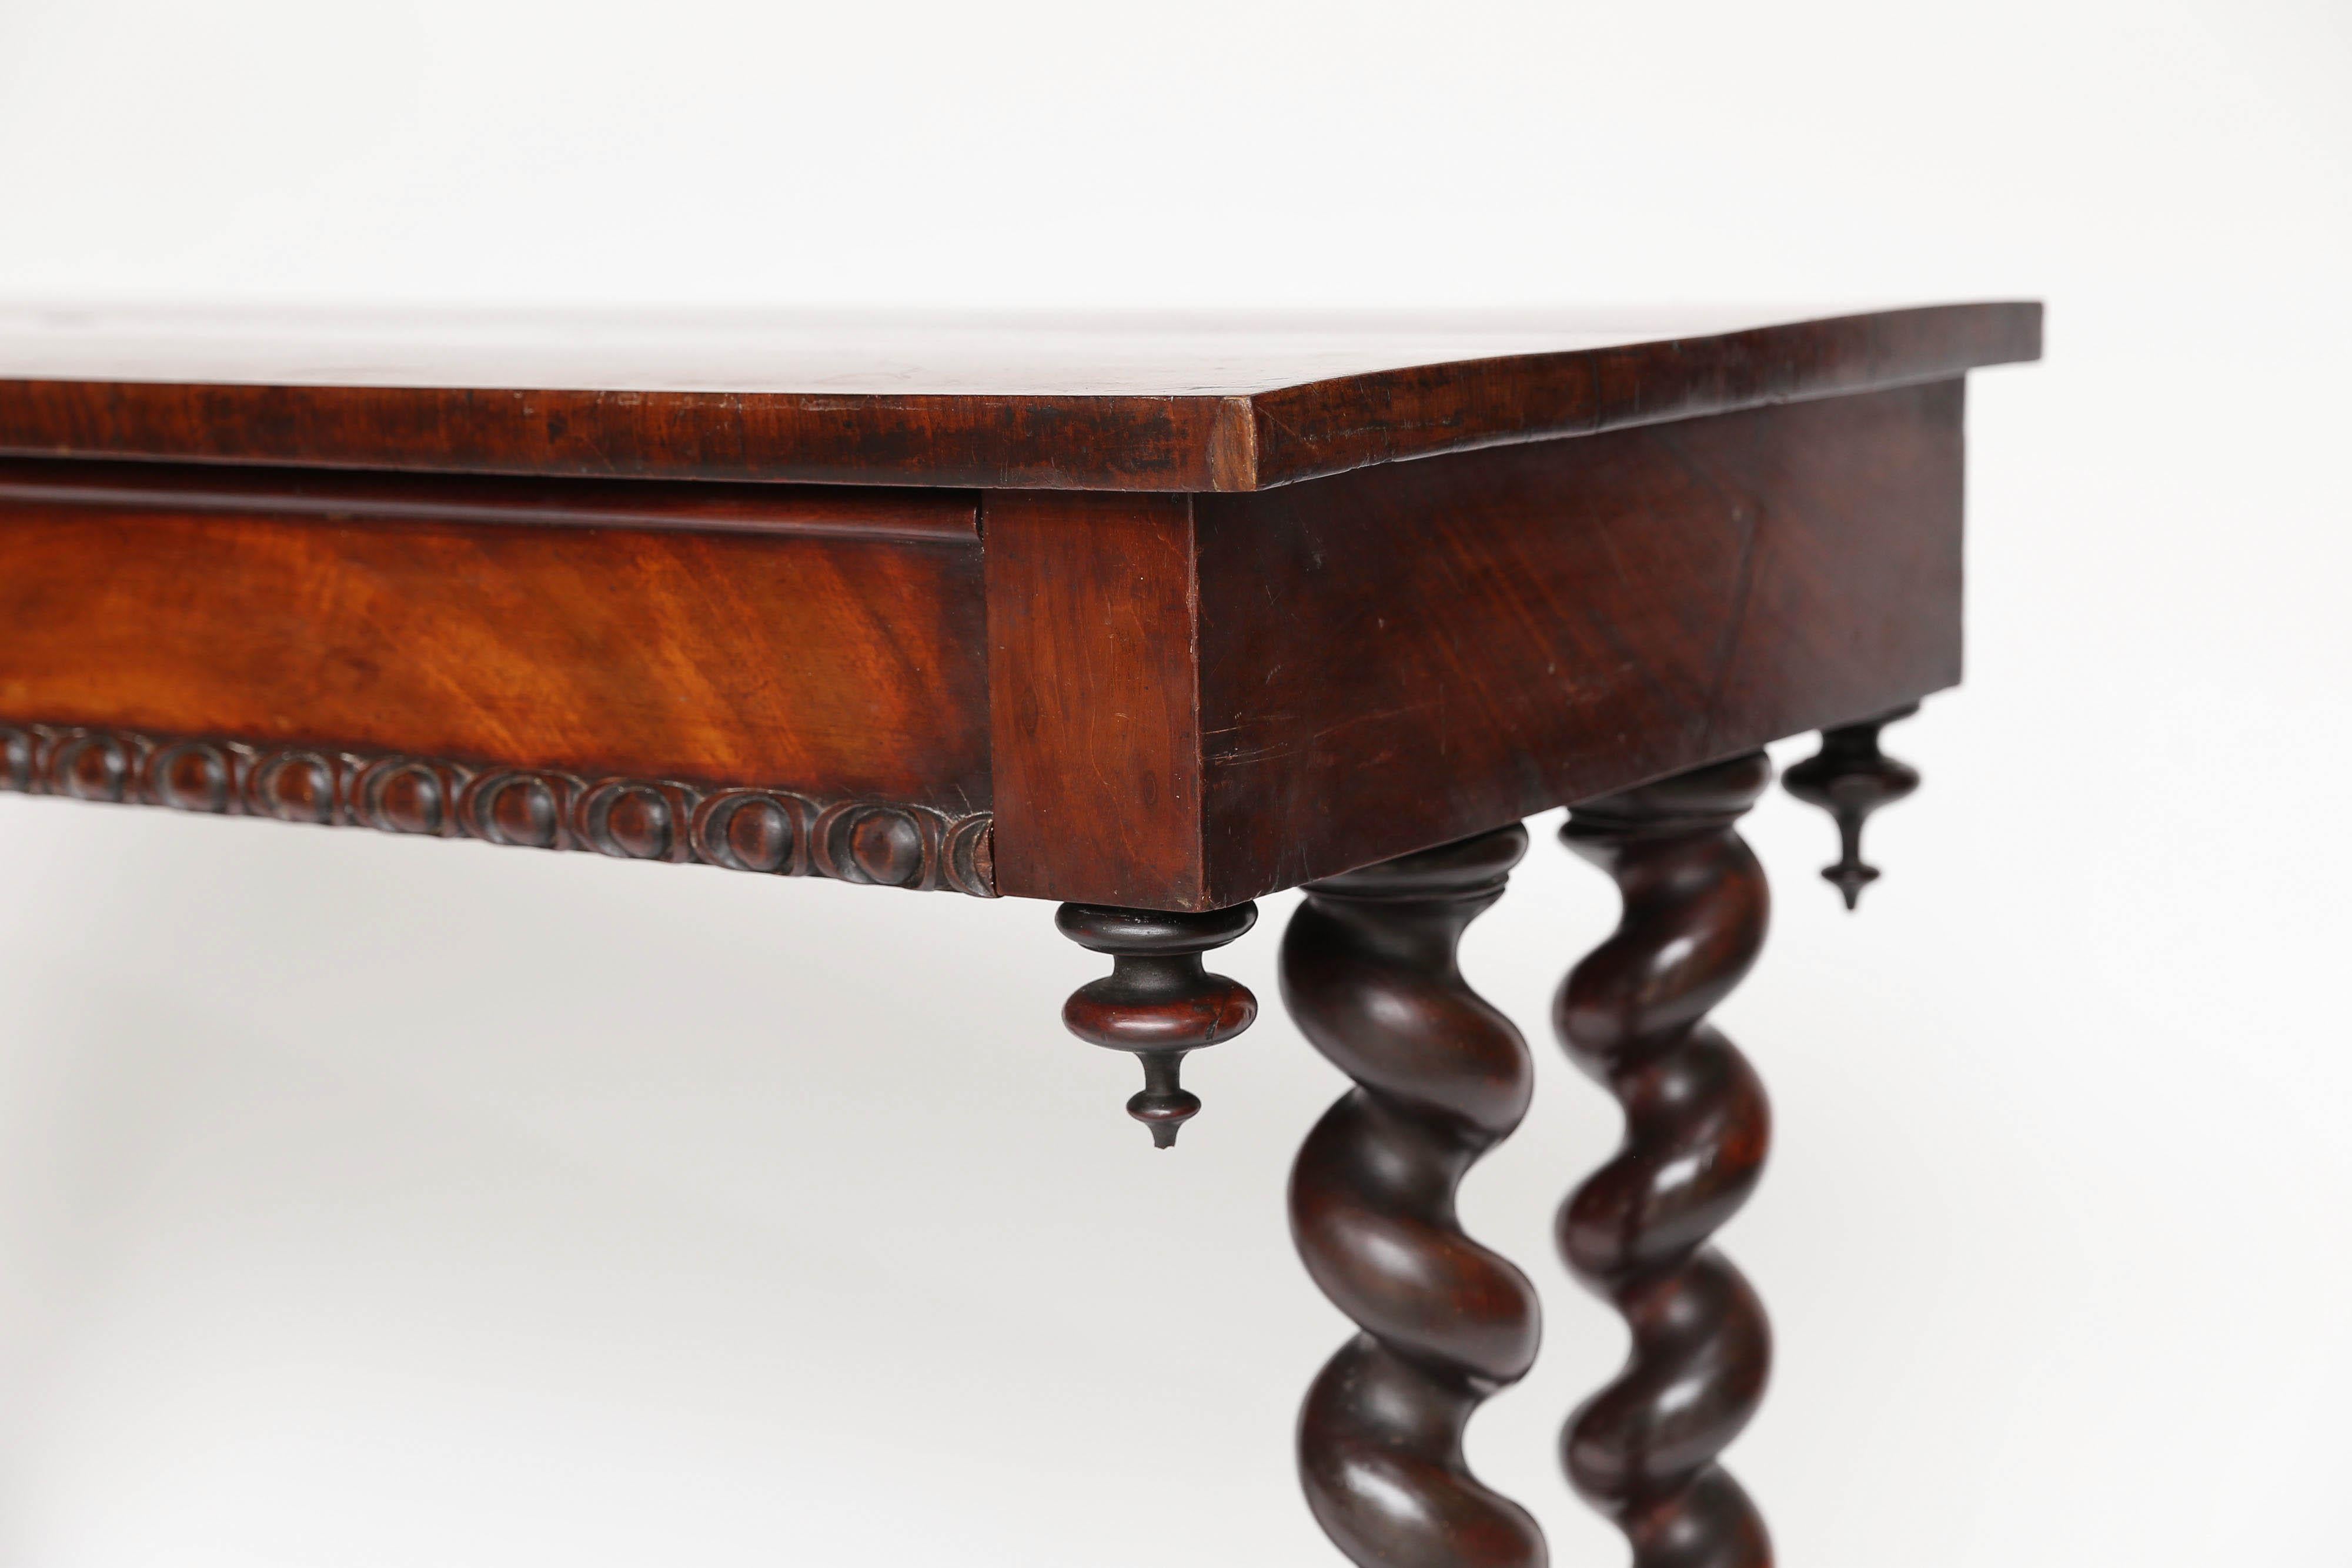 19th Century English Barley Twist Console Table with Two Drawers